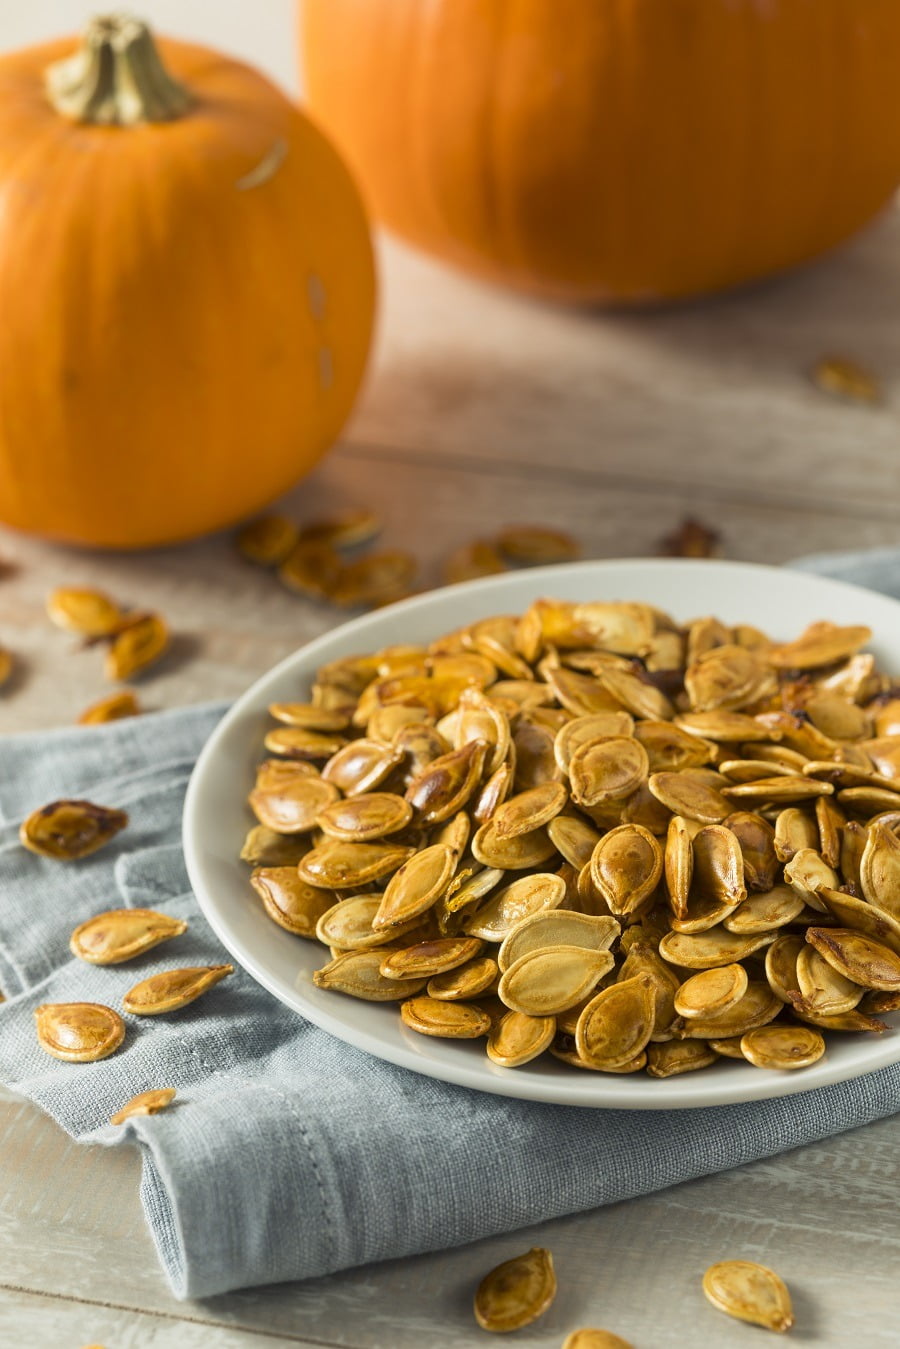 4 Roasted pumpkin seed recipes for the perfect fall snack